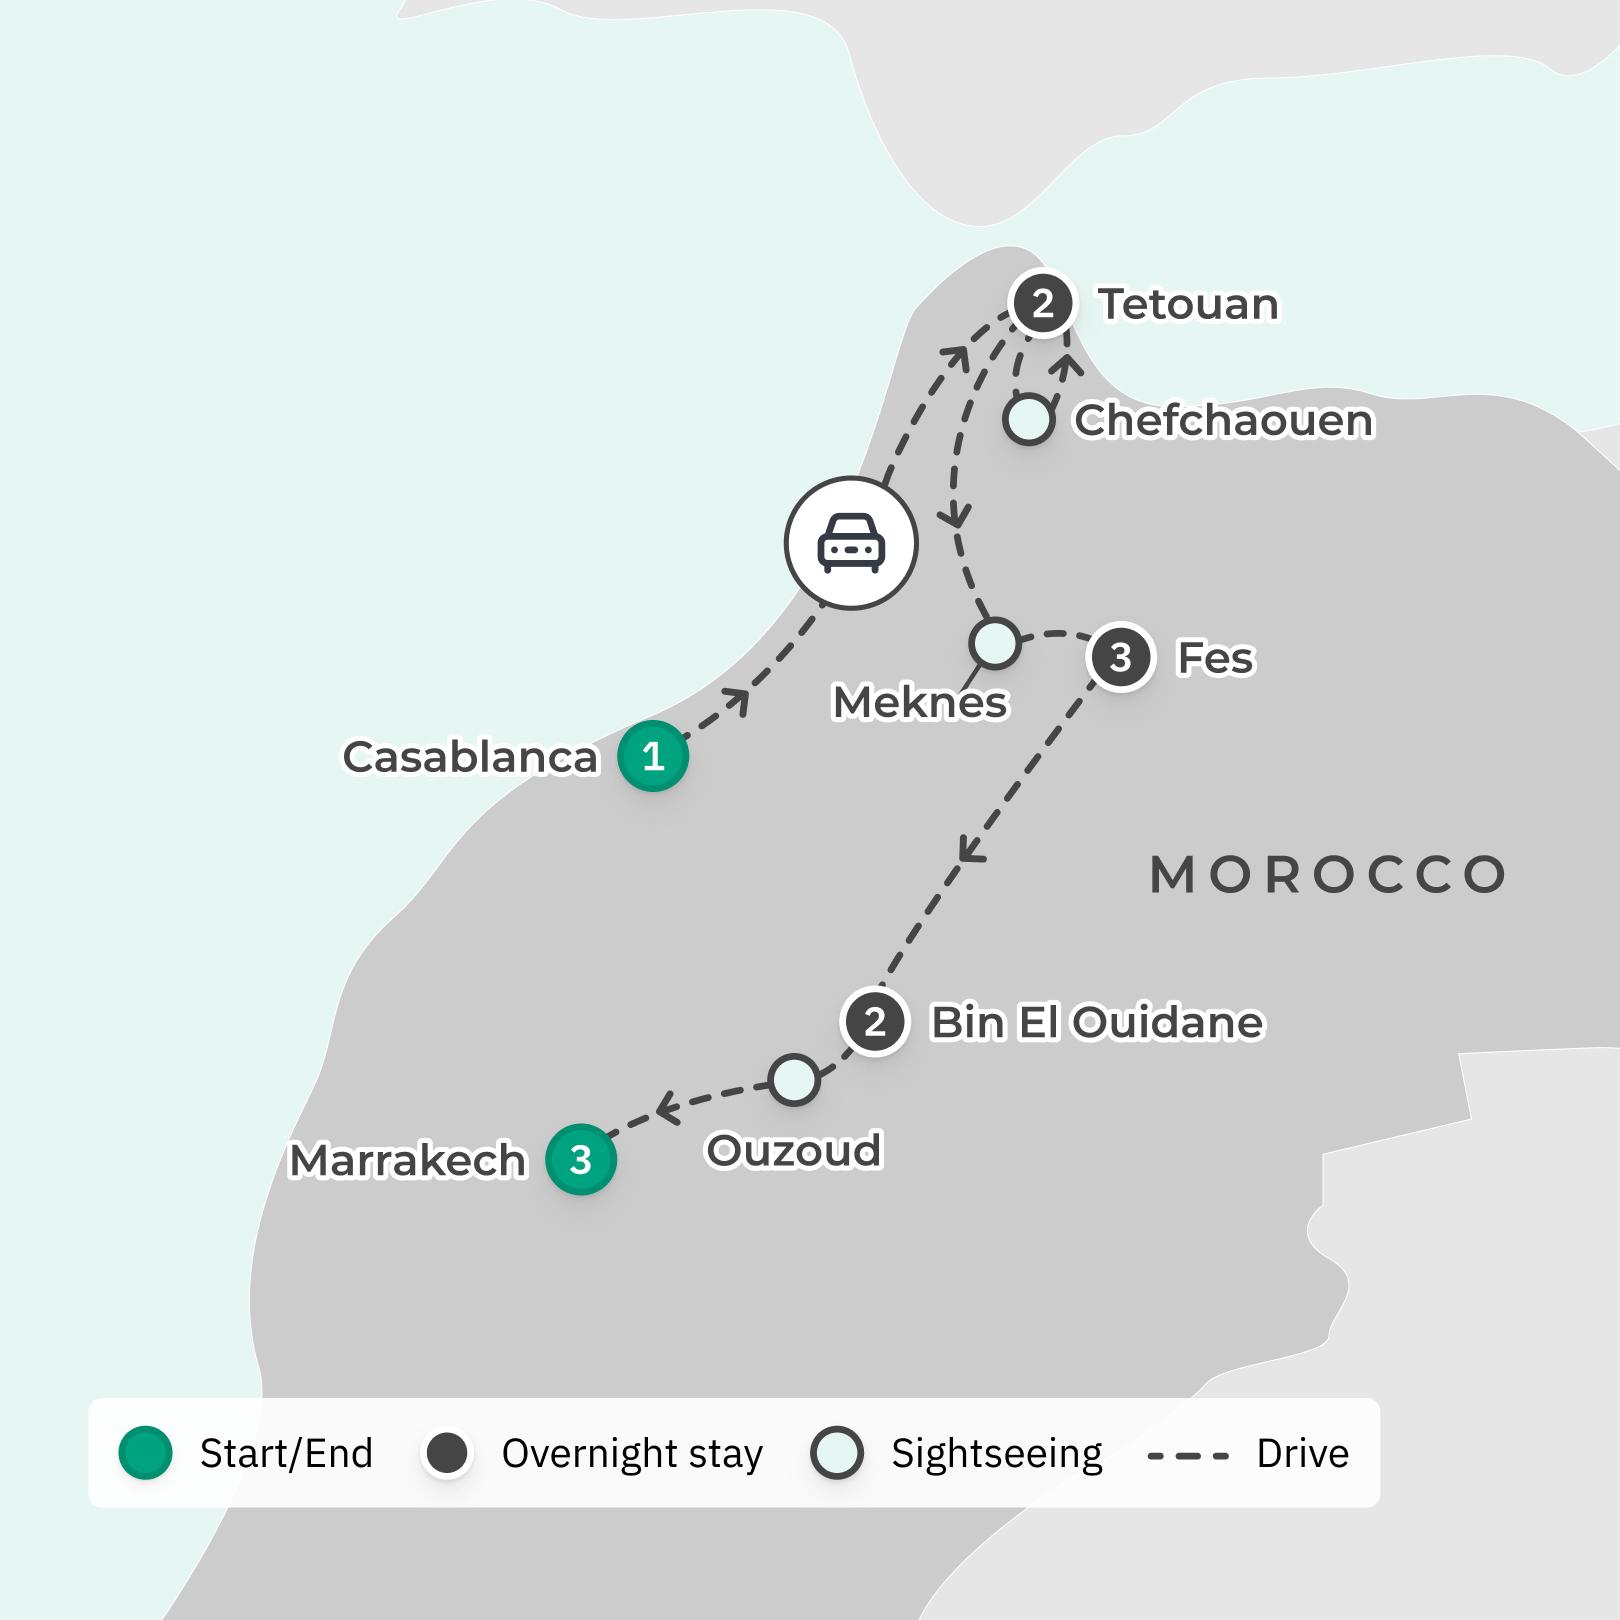 Flavours of Morocco Tour with Cooking Classes & Chefchaouen Visit route map